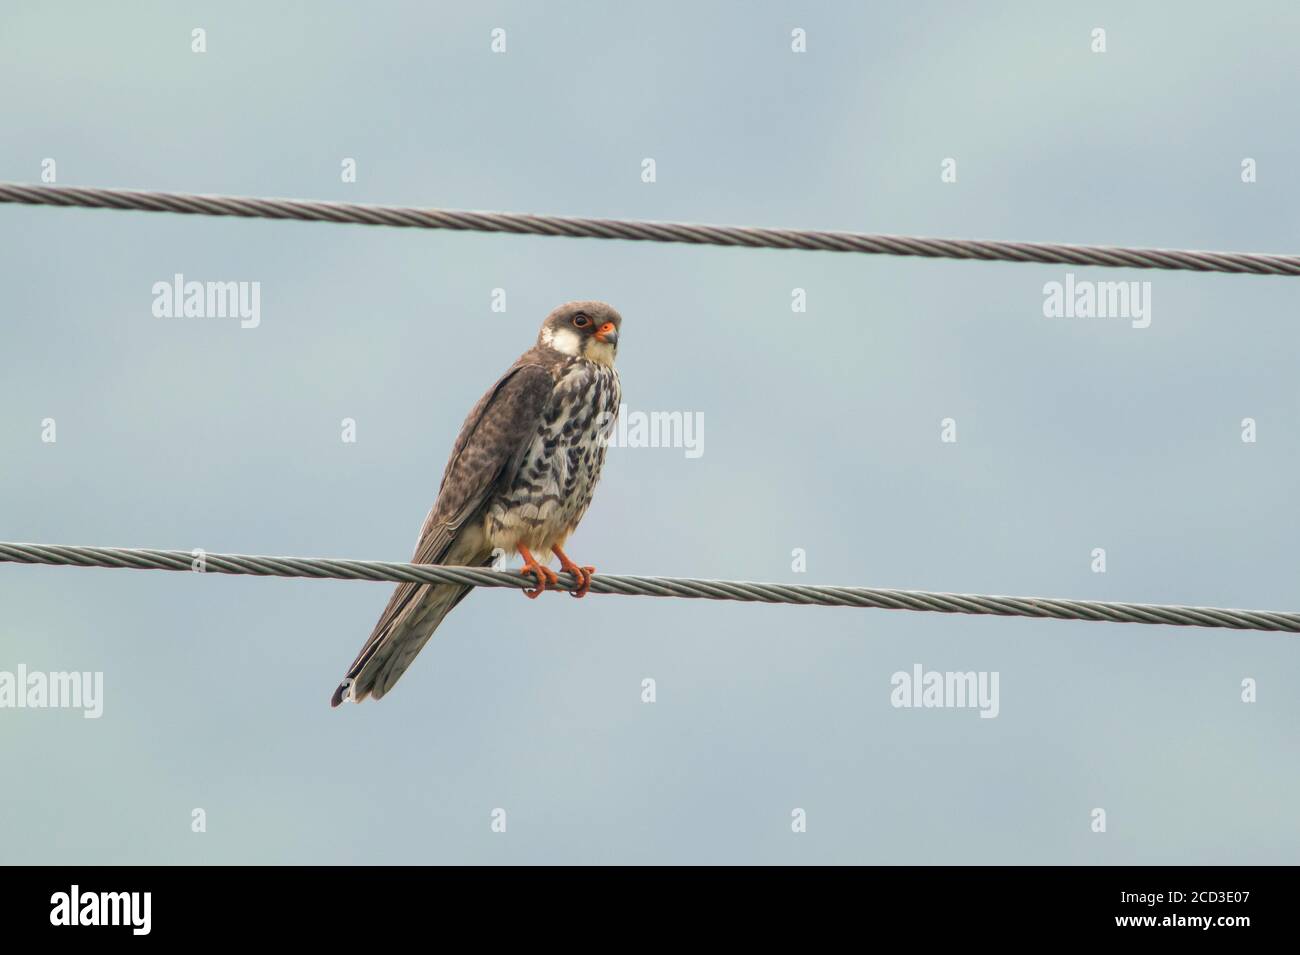 eastern red-footed krestel (Falco amurensis), Second calendar year Amur Falcon perched on electricity wire in a rural area, China, Dongzhai Stock Photo